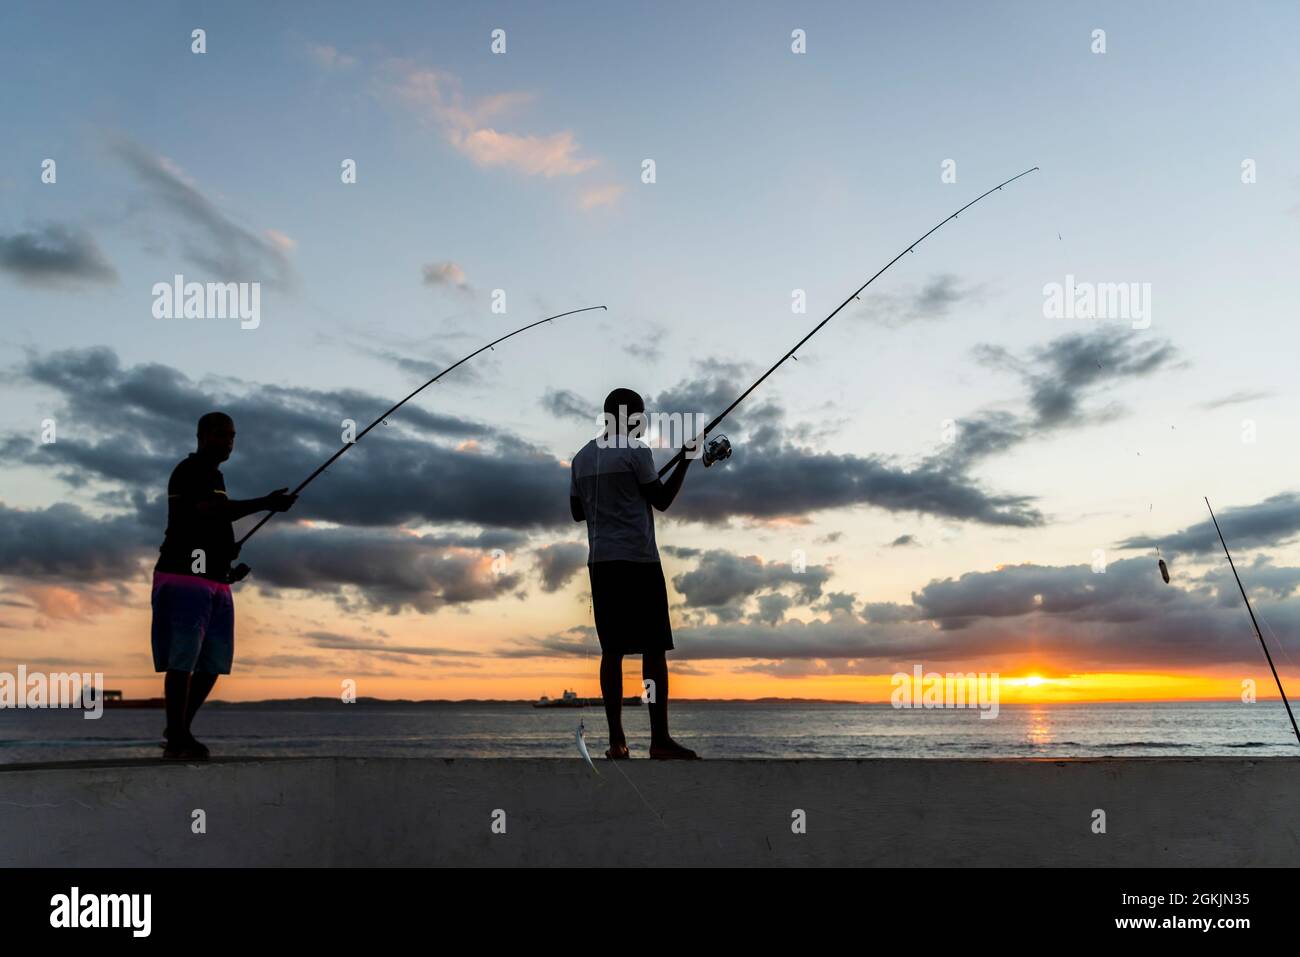 Salvador, Bahia, Brazil - May 23, 2021: Silhouette of fishermen with their poles at sunset. Stock Photo